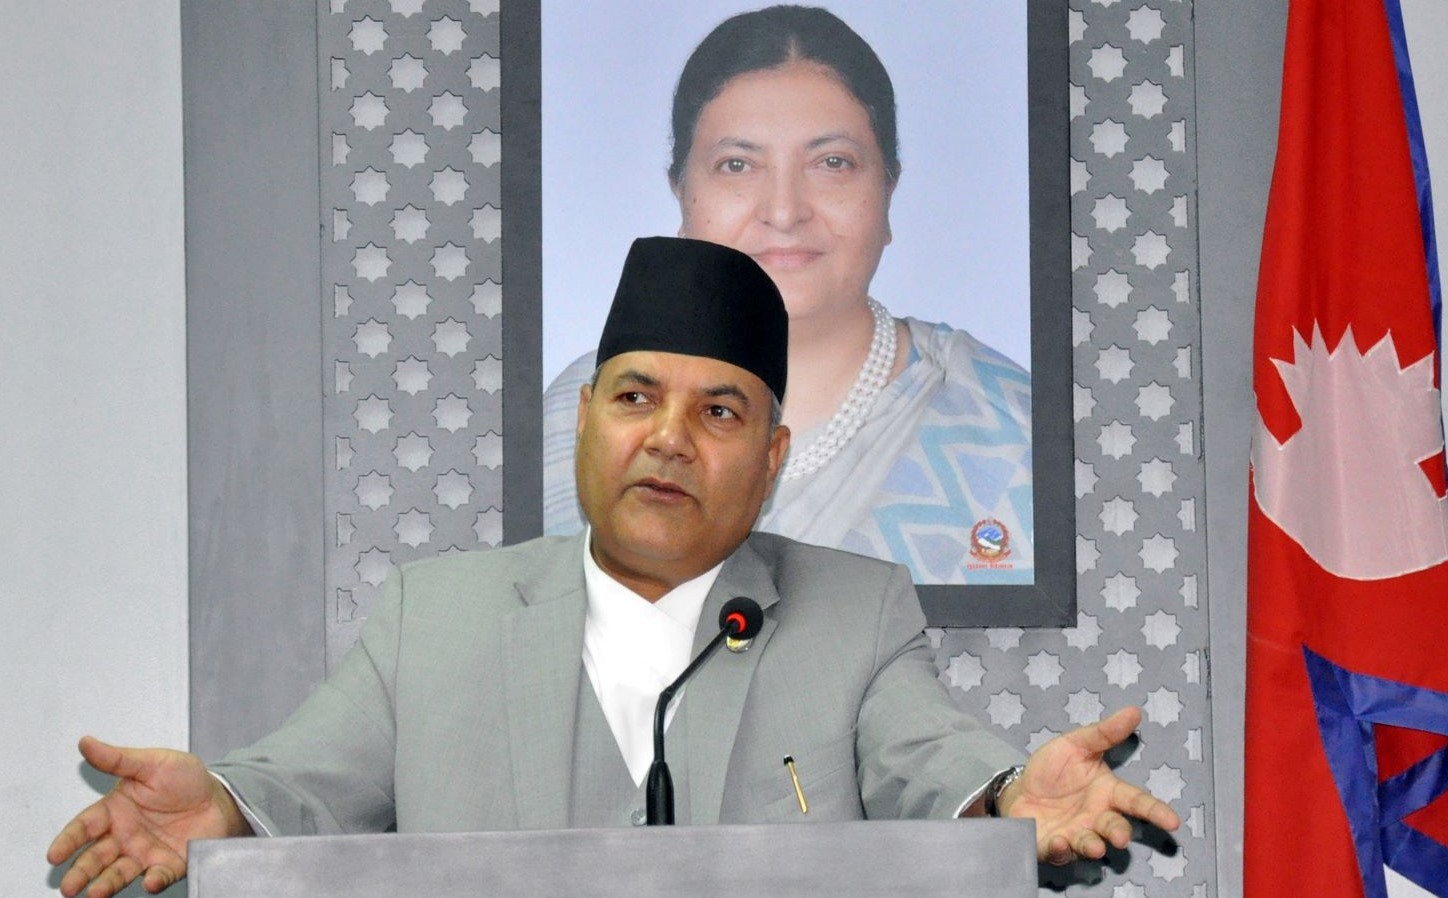 government-does-not-dither-on-border-issue-govt-spokesman-baskota